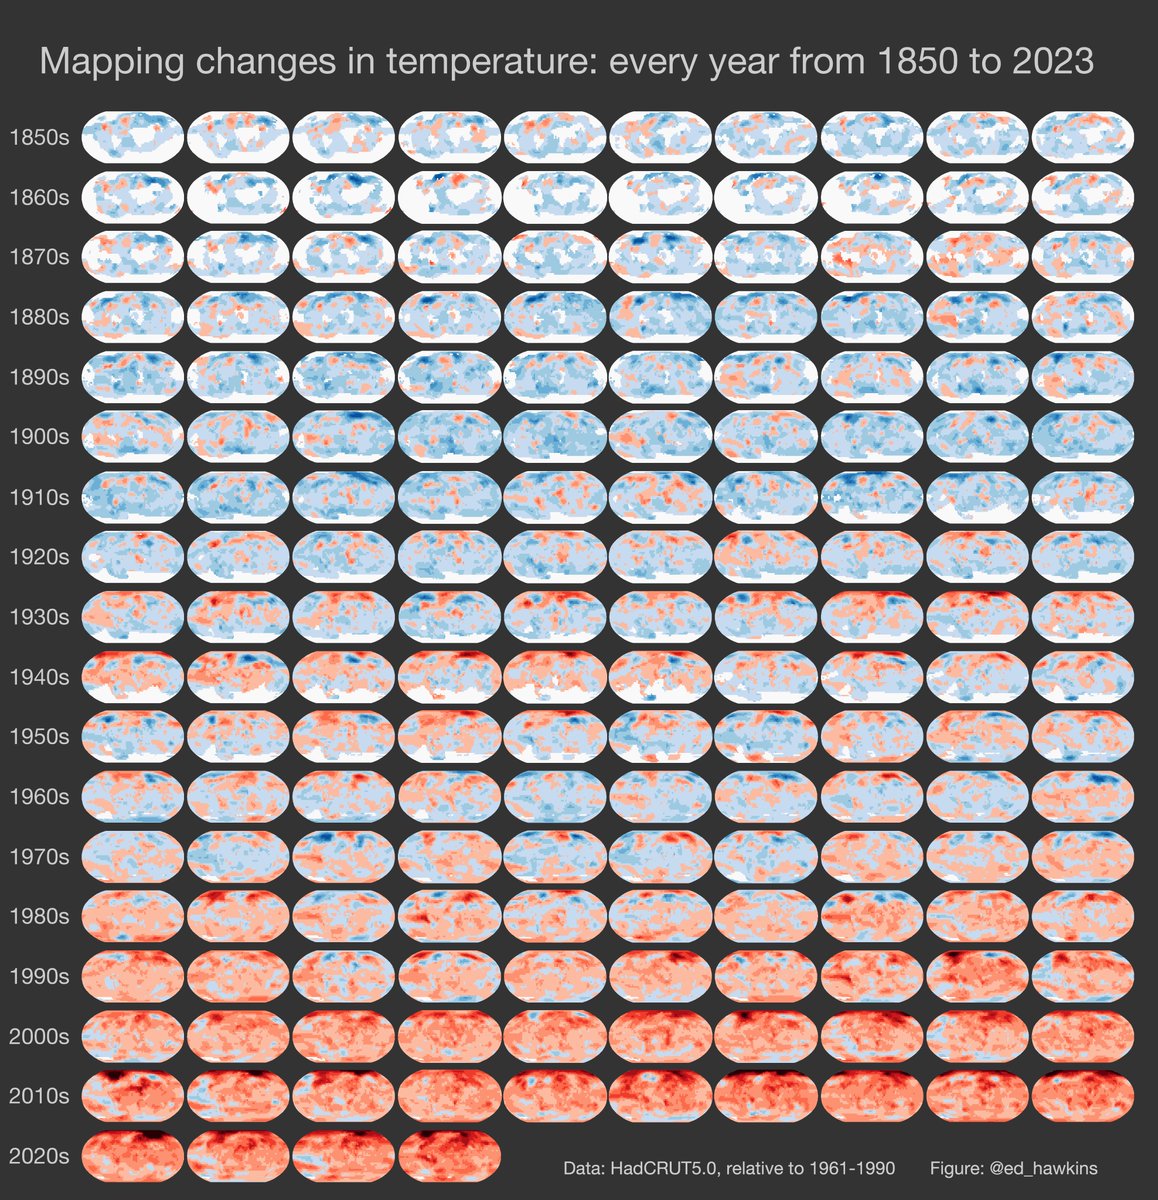 Mapping changes in temperature: every year from 1850 to 2023 2023 was the warmest year on record. This 'small multiples' representation of observed changes in temperature show how the planet is heating rapidly almost everywhere.